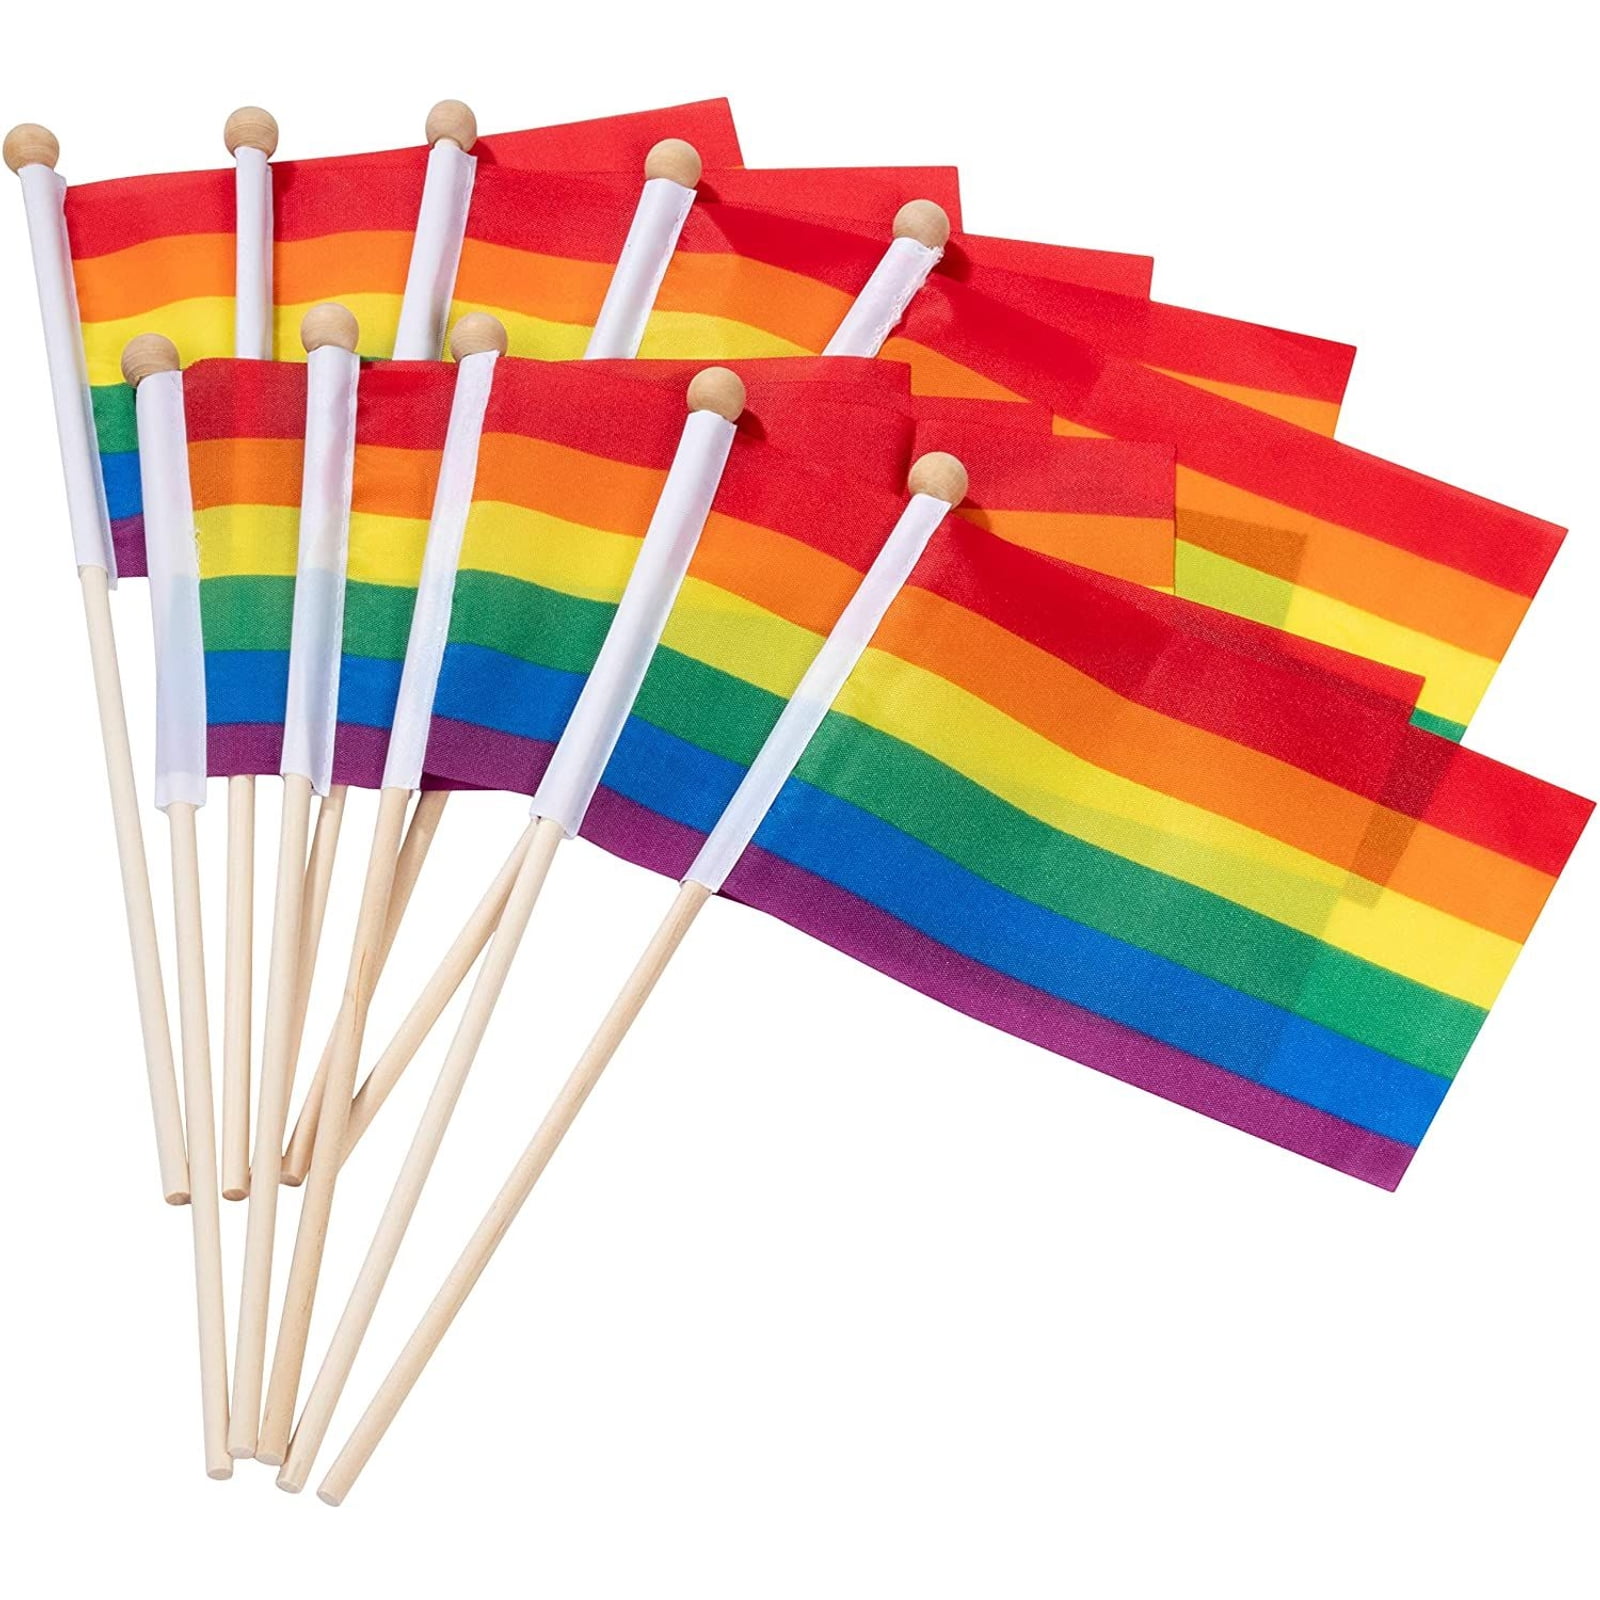 Anley 3' x 5' 100% Polyester Philly Pride Flag Philly's Rainbow 